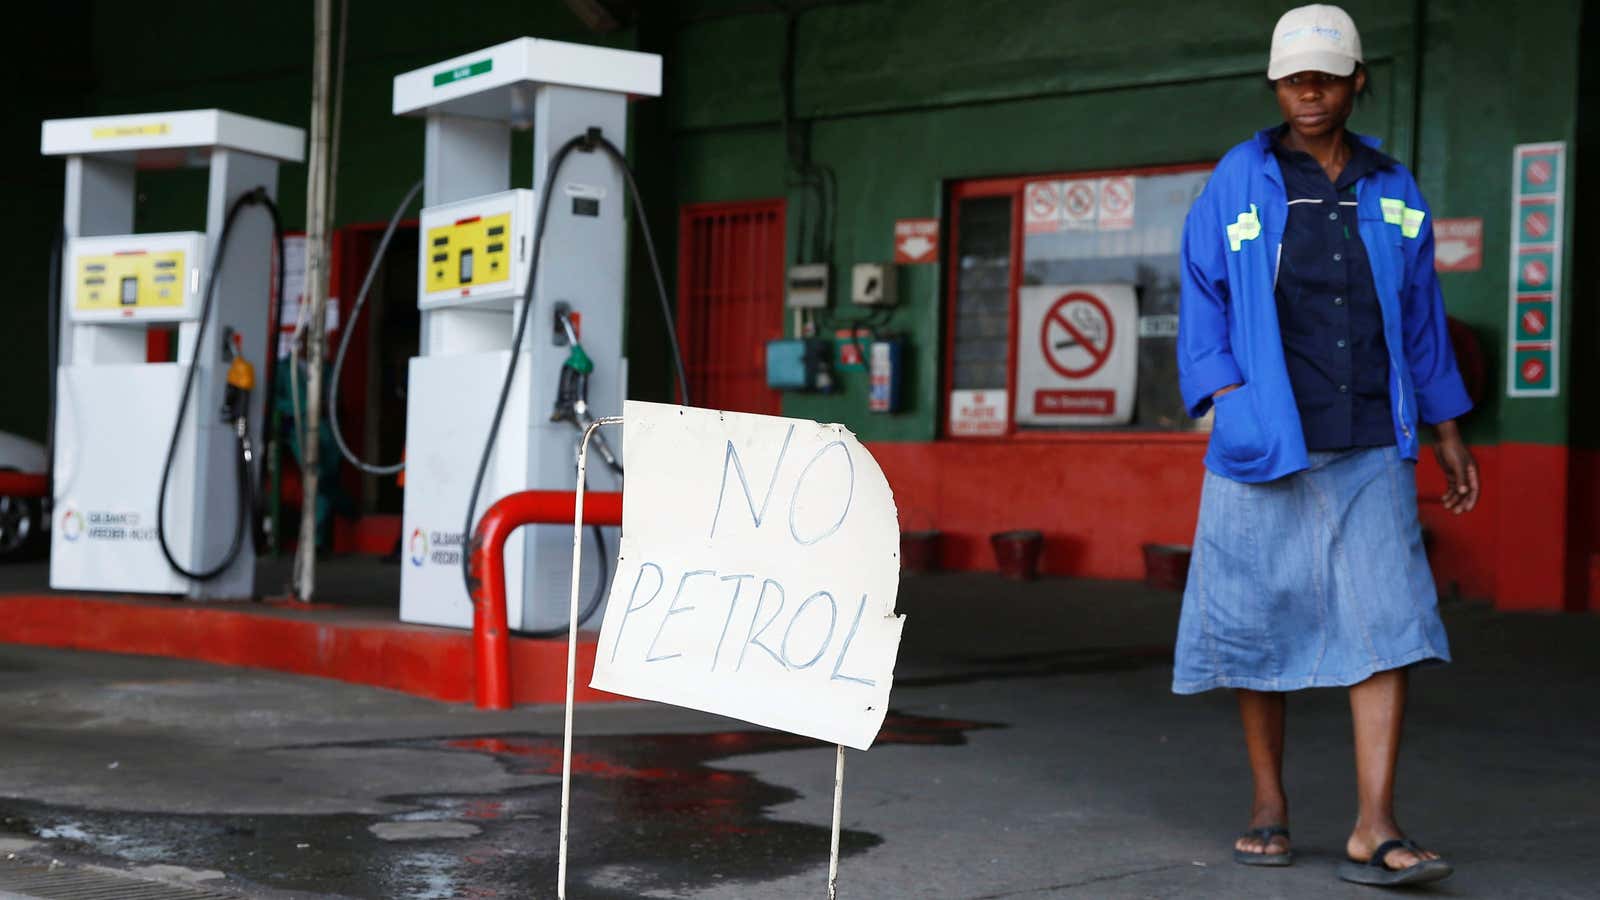 A woman walks past a “No Petrol” sign at a fuel station in Harare, Zimbabwe, Oct. 9.